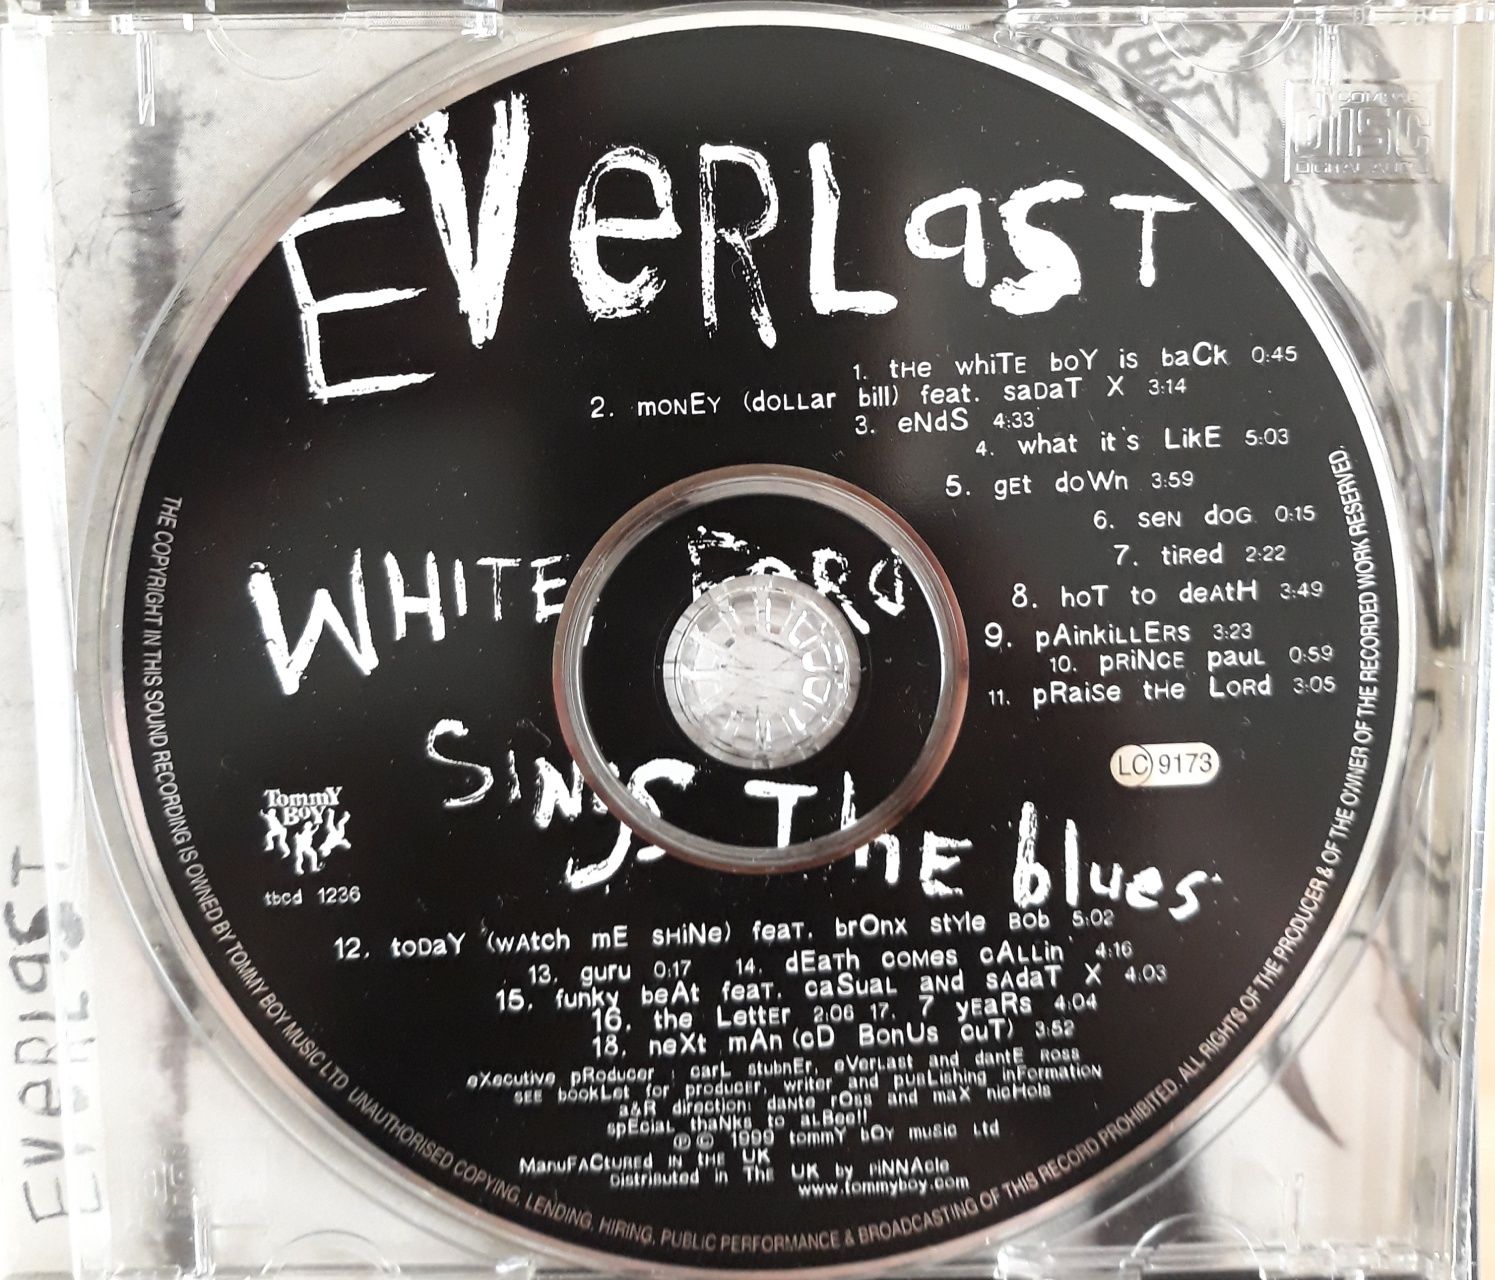 CD Everlast - Whitey Ford Sings the Blues